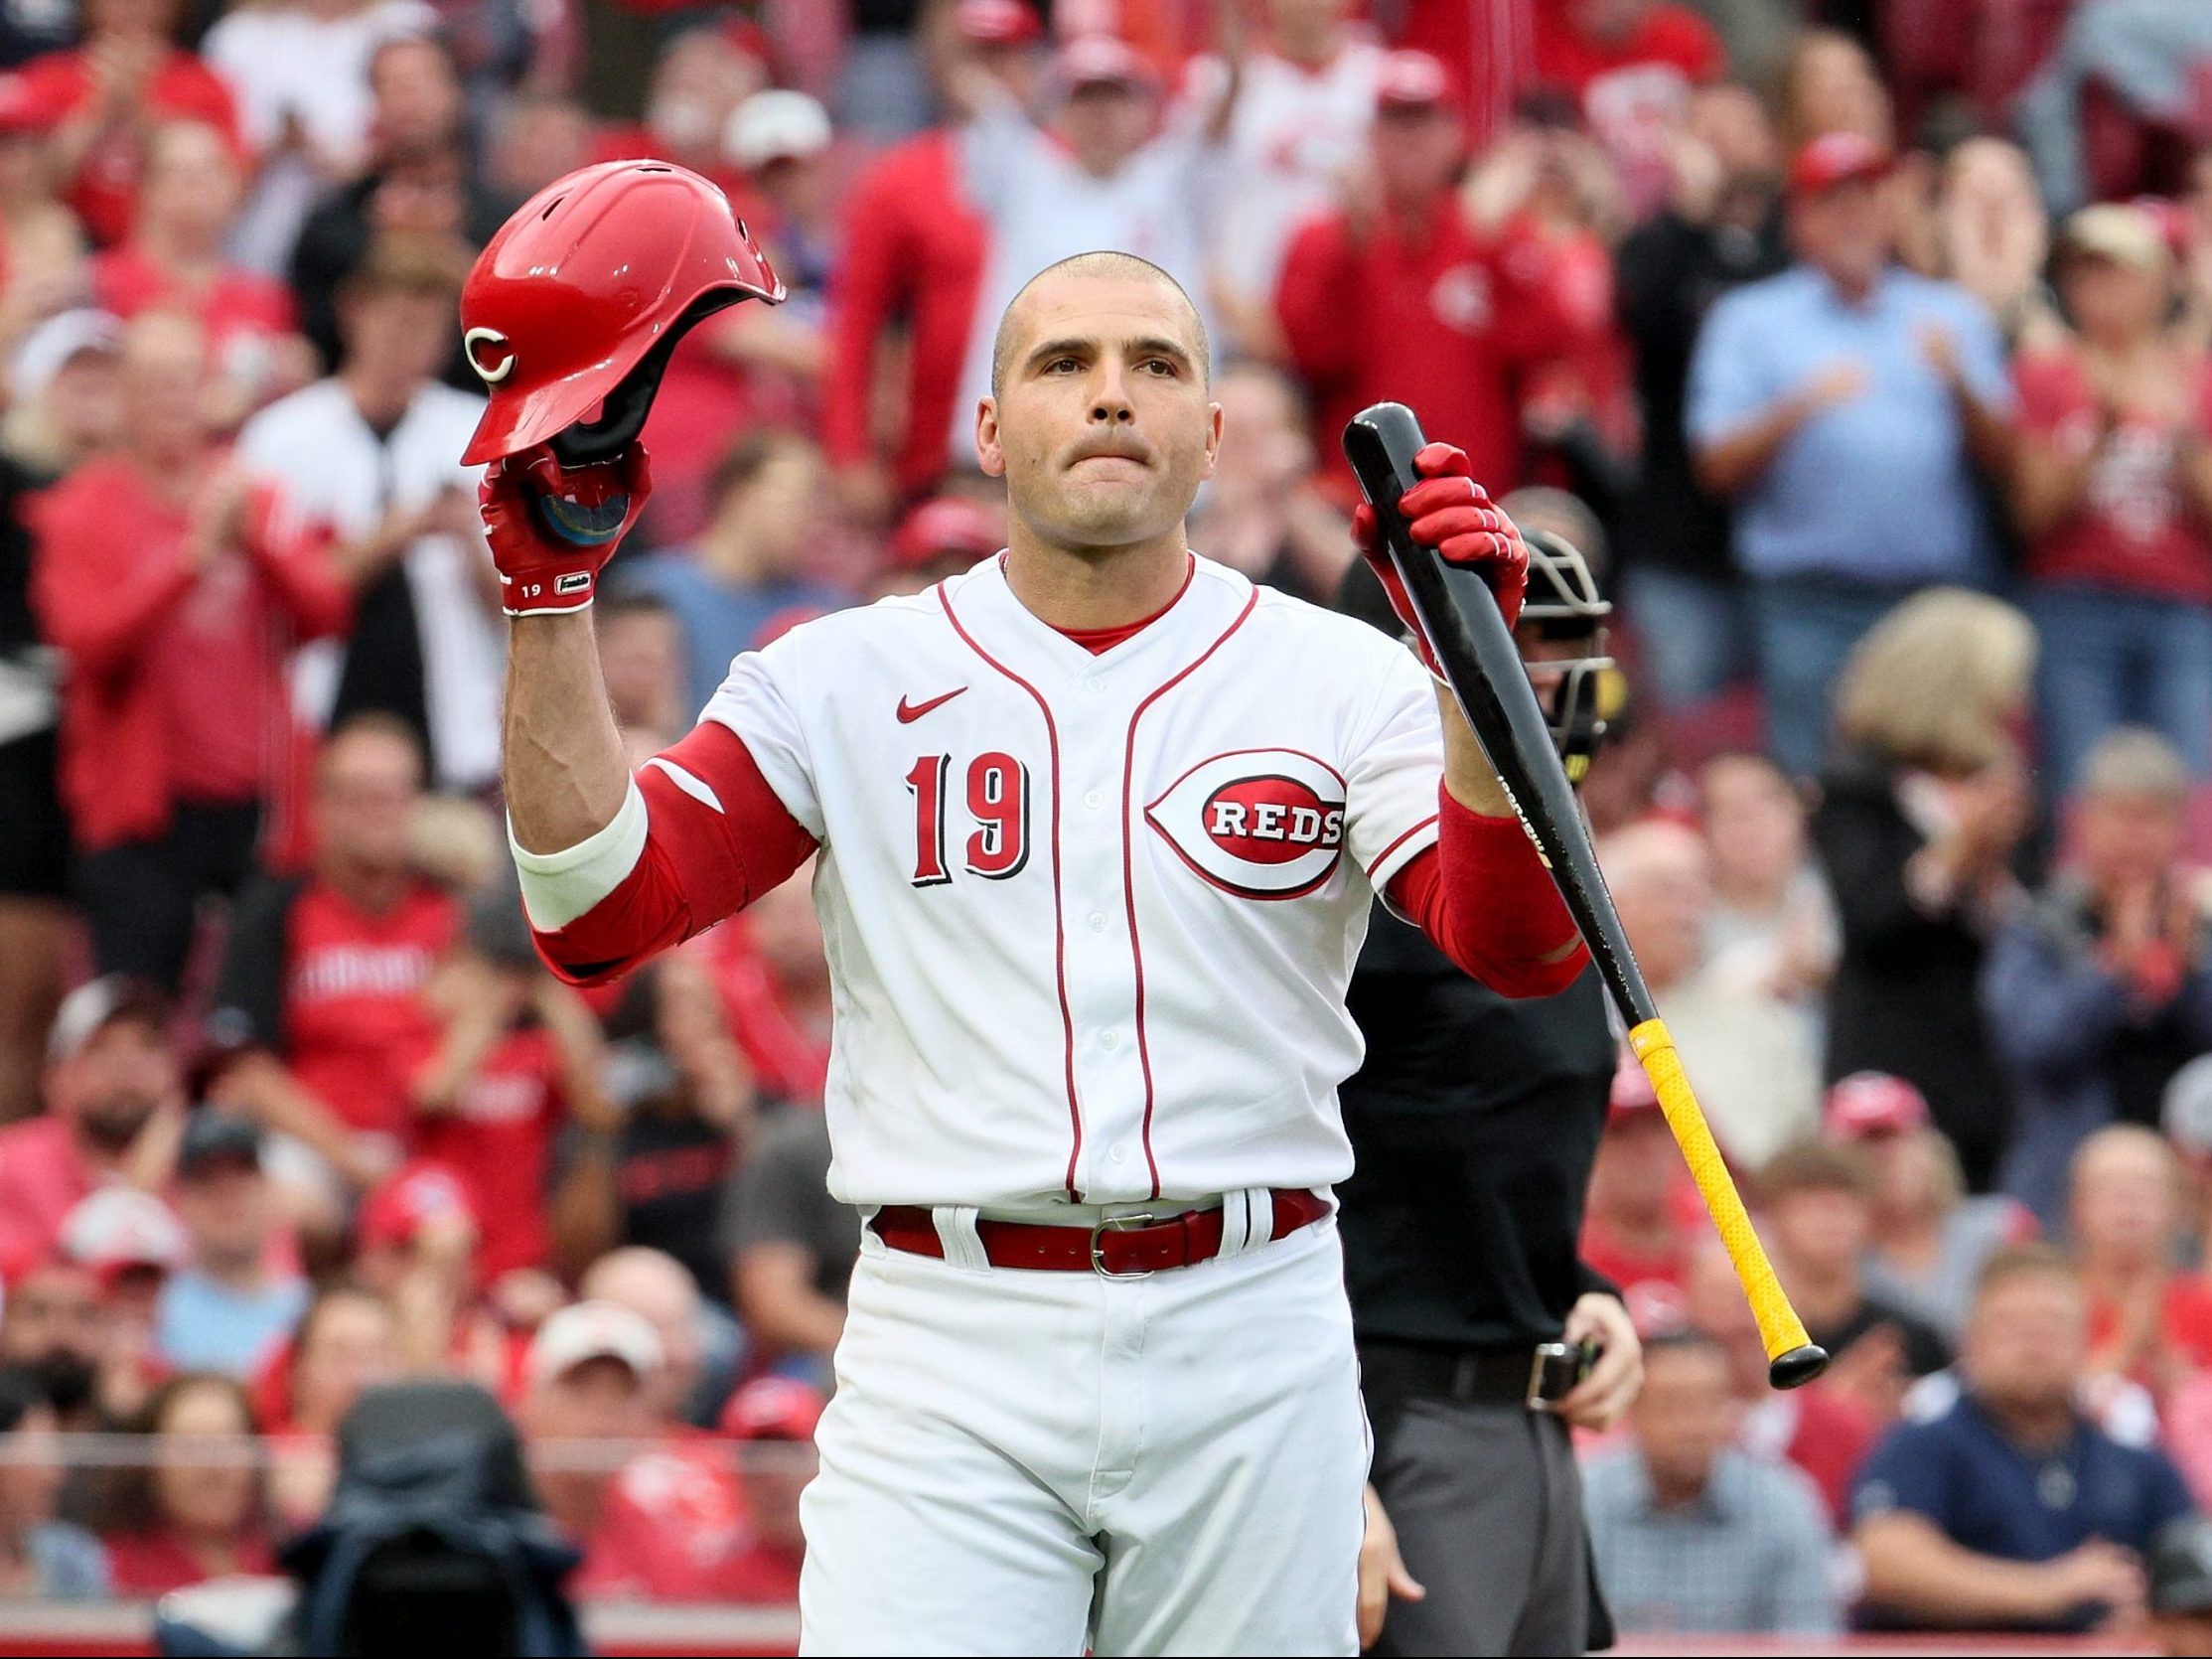 More Than 80 Years Of Reds' MVPs: Part II